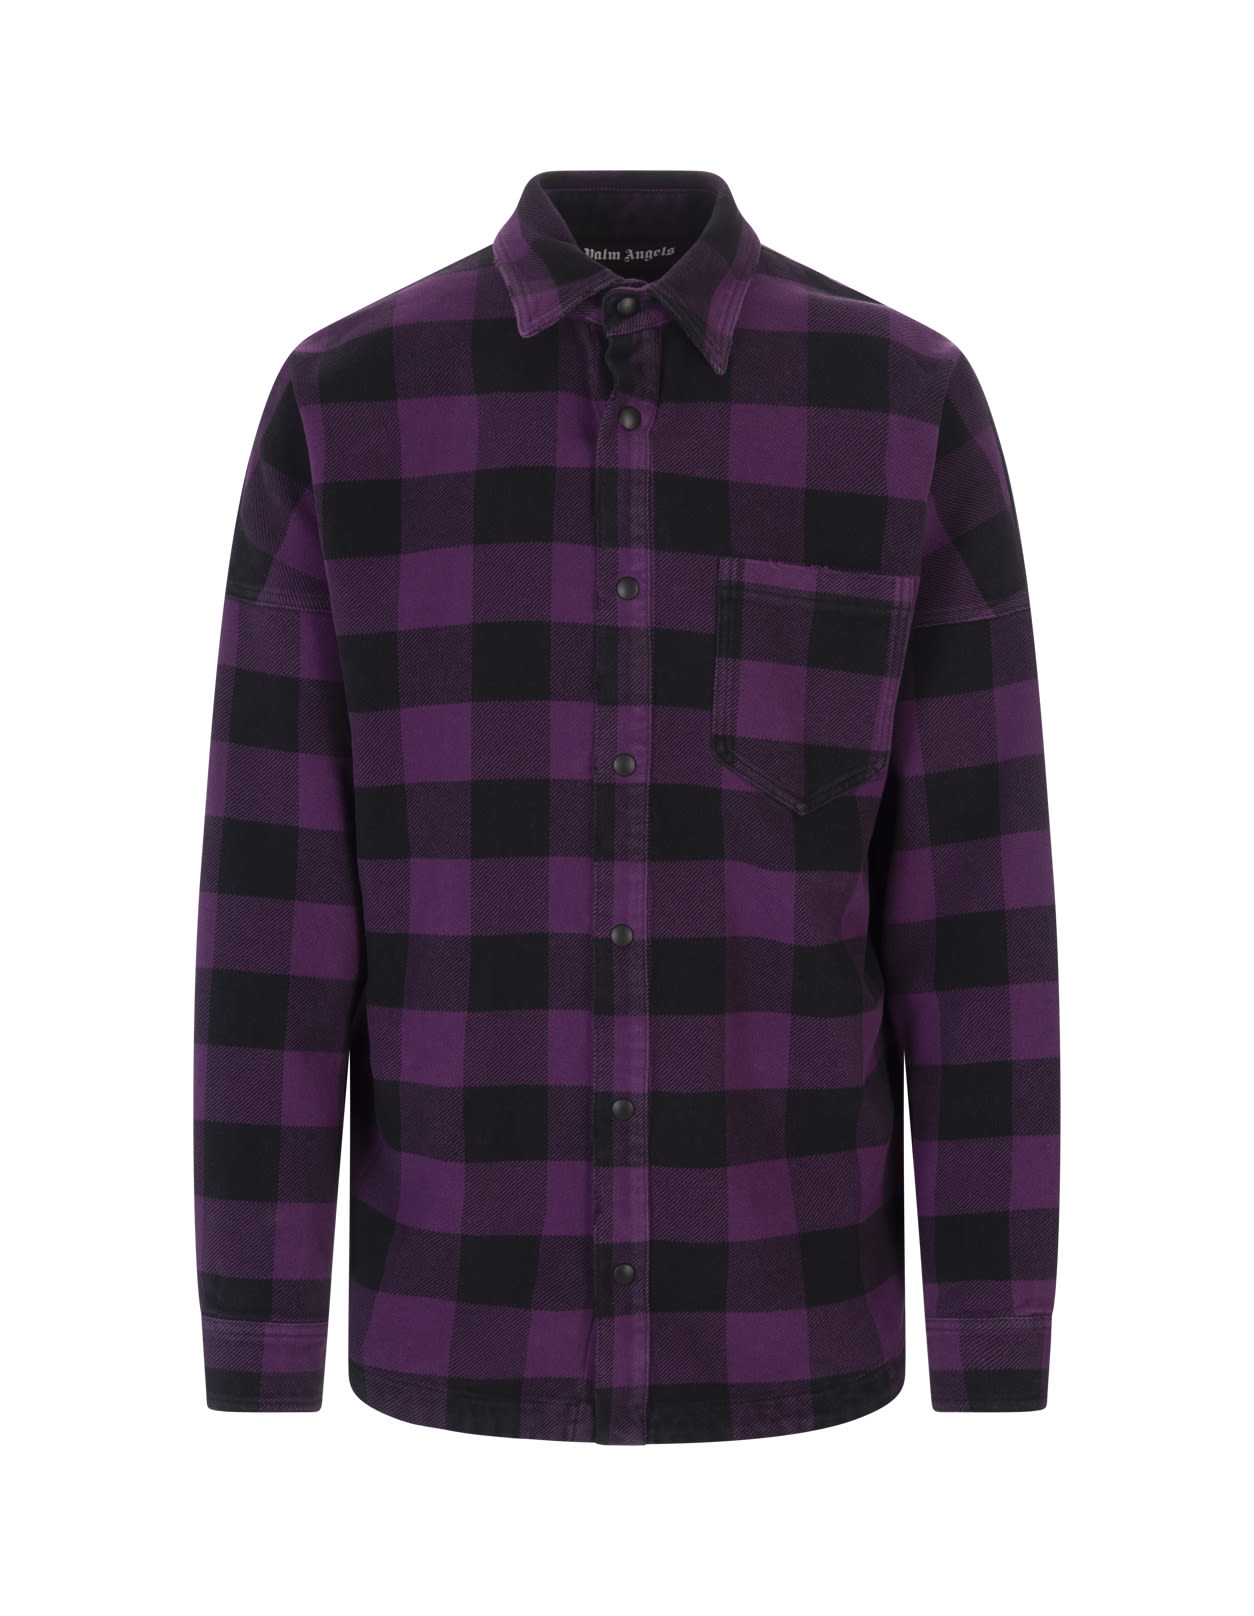 Palm Angels Man Oversize Shirt In Purple And Black Checked Cotton With Logo